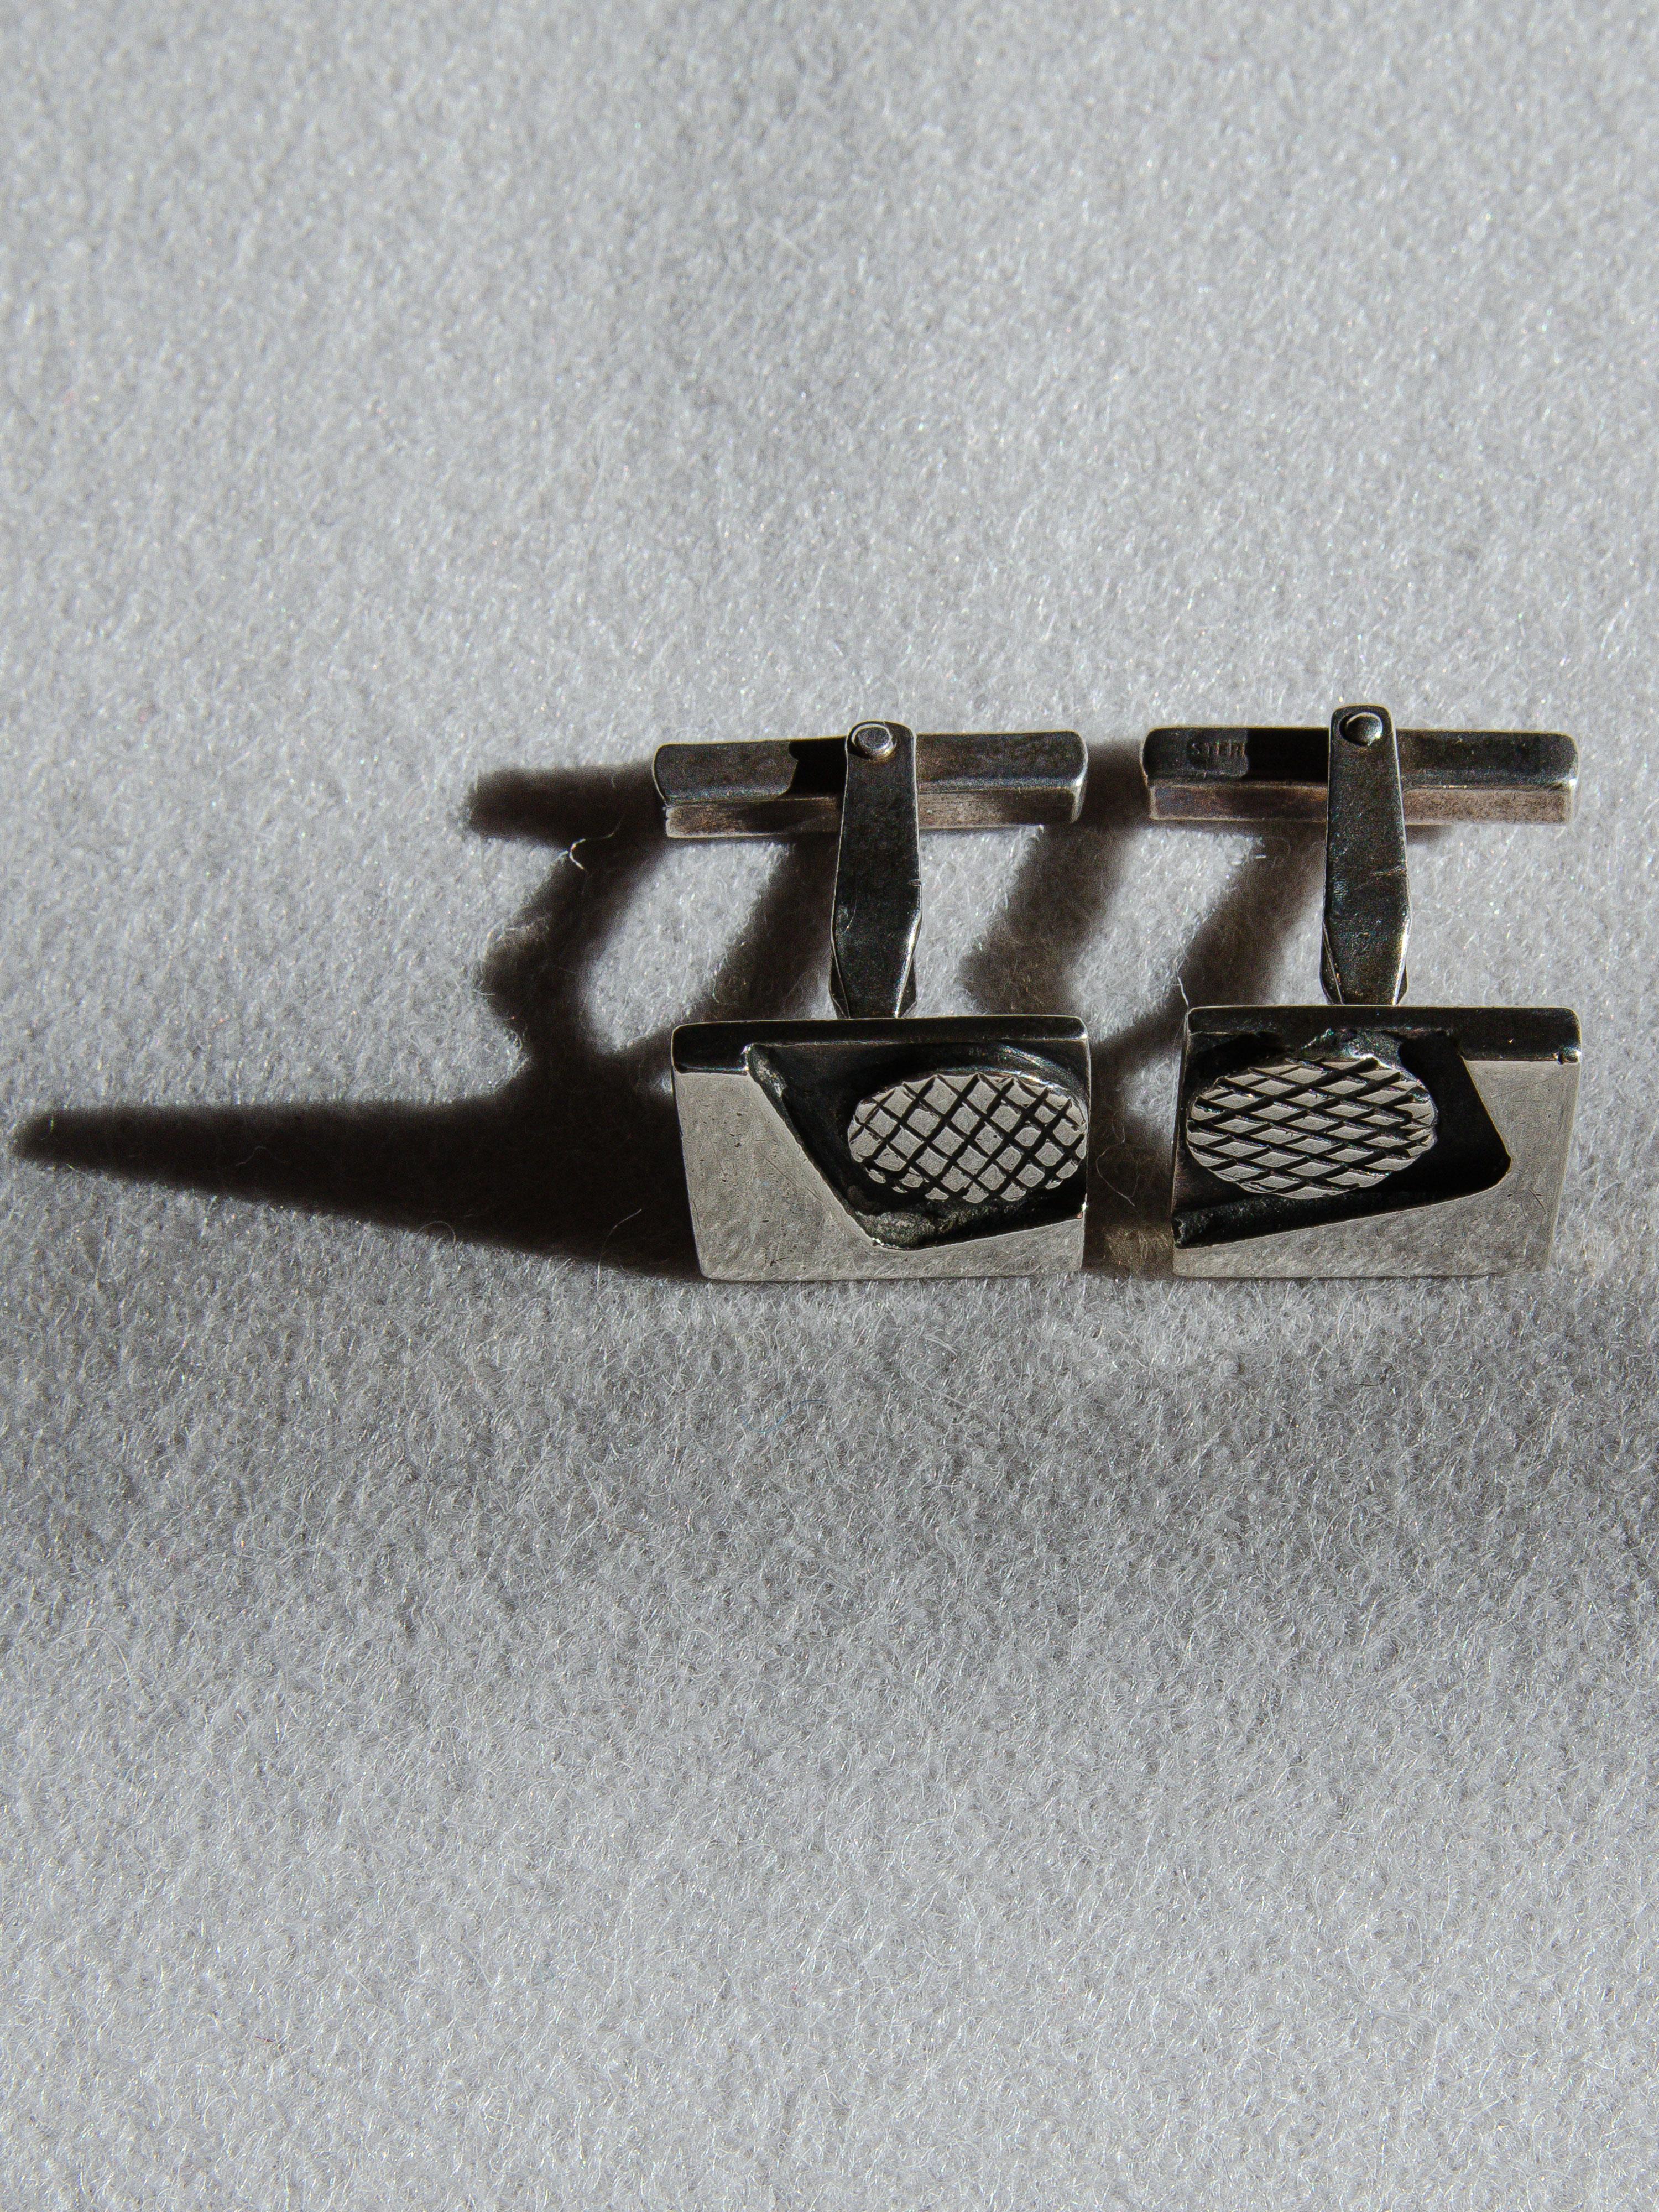 Rare pair of sterling silver cufflinks designed by Margaret DePatta (1903-1964), one of the most influential and most collected of the 20th mid-century Modernist jewelers. Her adherence to Bauhaus design and risk-taking experiments in art and